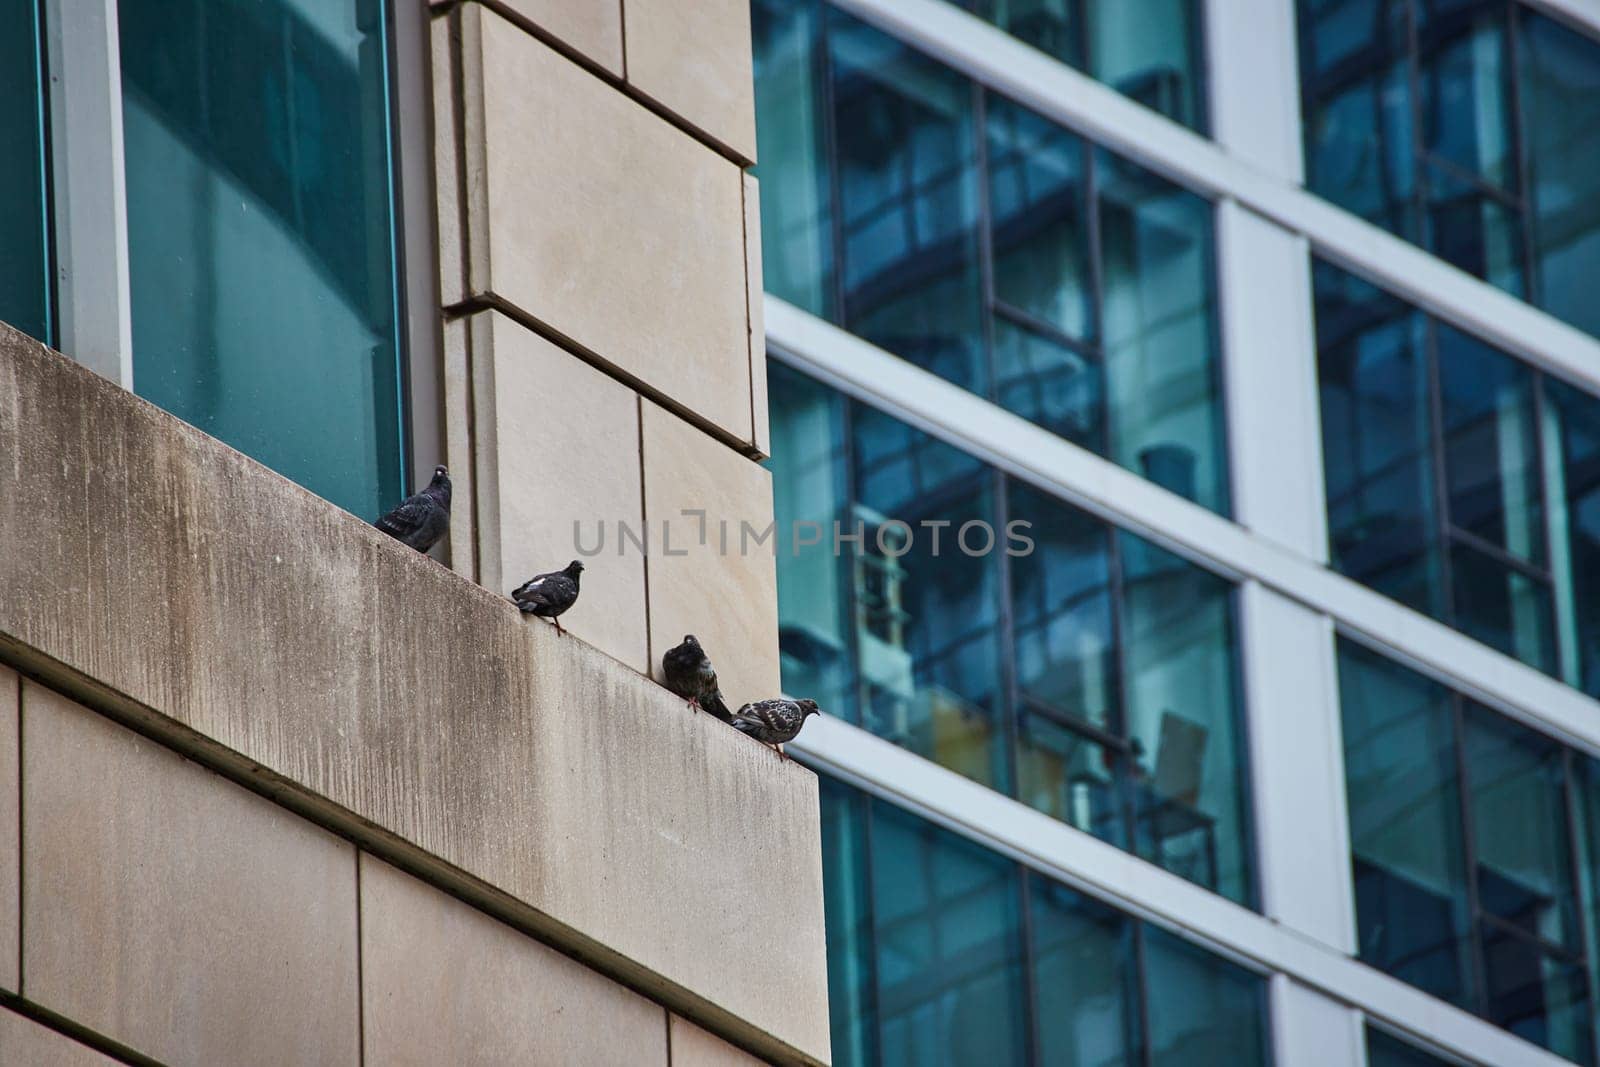 Pigeon, bird, animals standing on wall ledge of office building with blue tinted windows, Chicago by njproductions